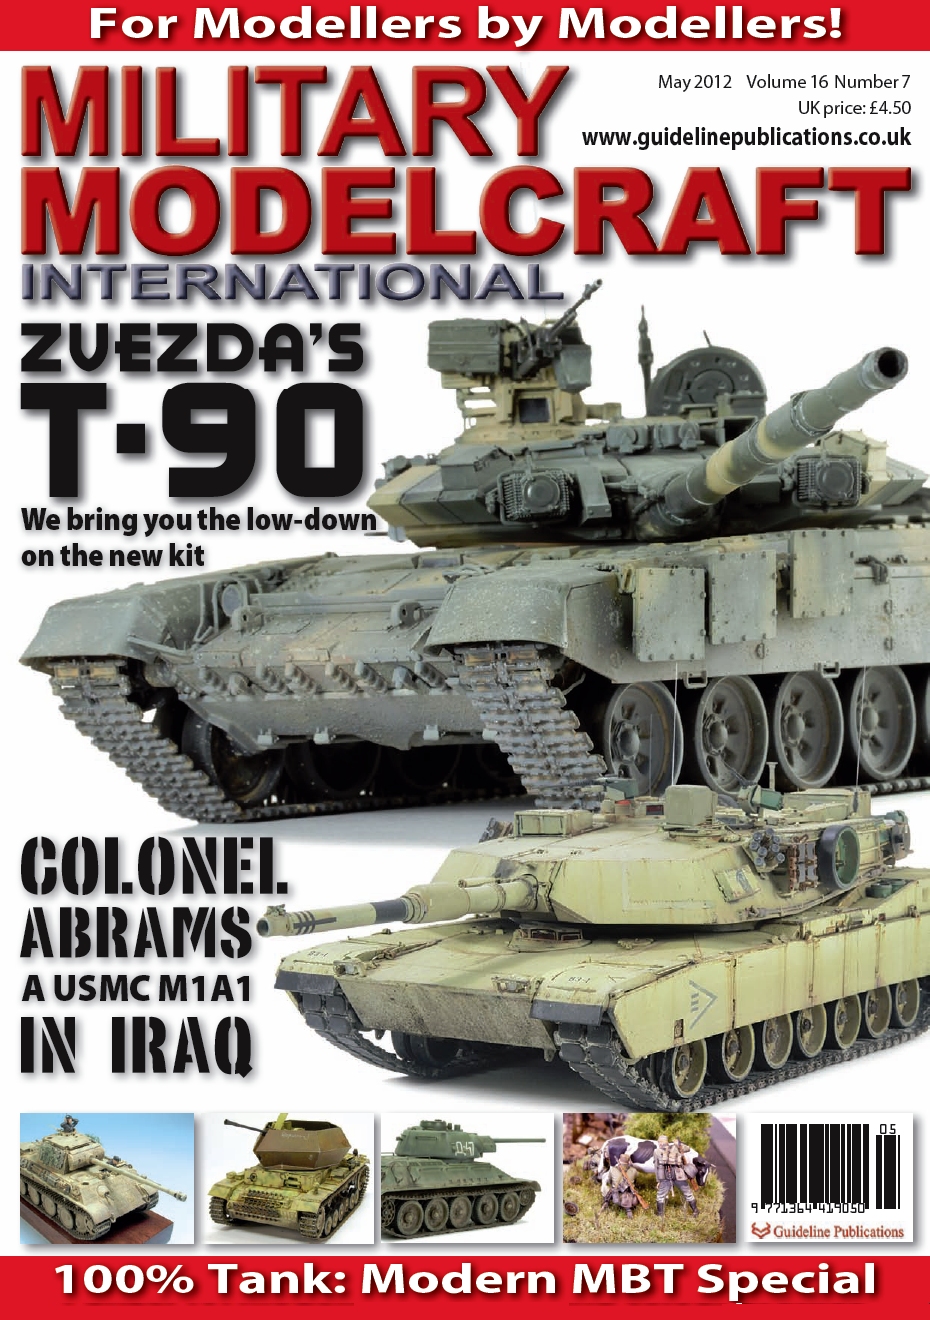 Guideline Publications Ltd Military Modelcraft May 2012 vol 16 - 7 